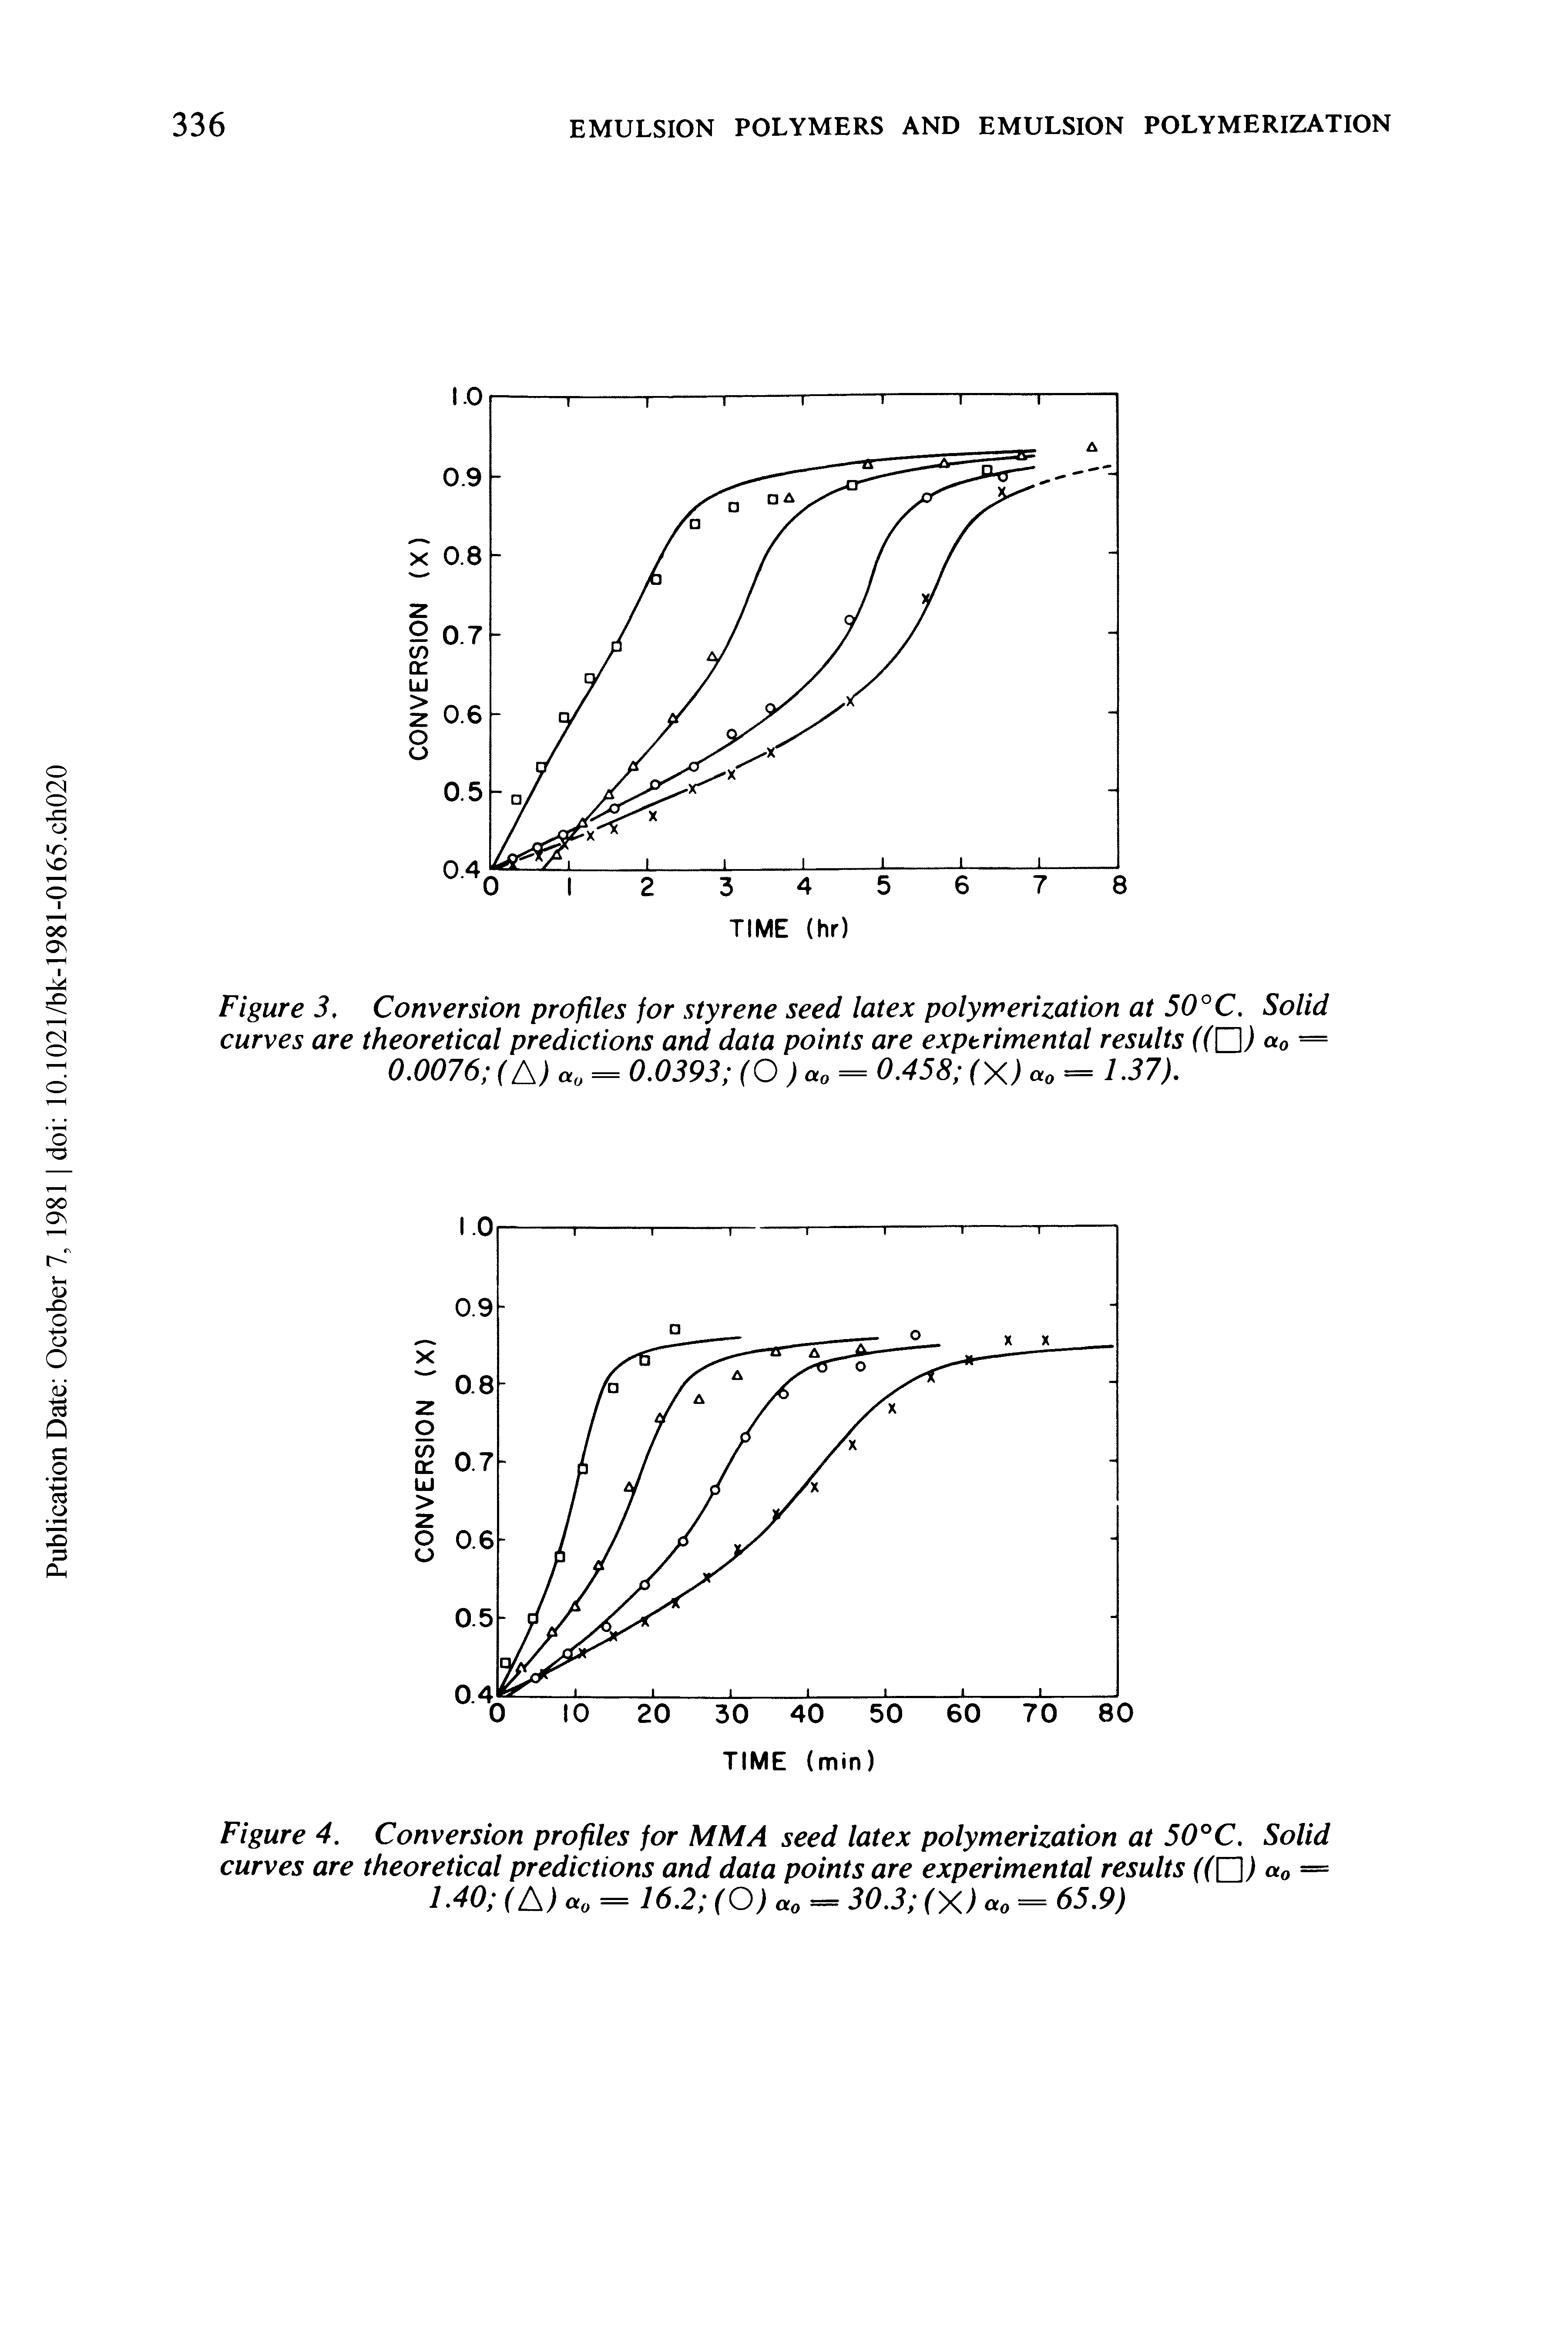 Figure 3, Conversion profiles for styrene seed latex polymerization at 50°C. Solid curves are theoretical predictions and data points are experimental results (( 3) < o = 0.0076 (A) a0 = 0.0393 (O )a0 = 0.458 (X) o = 137).